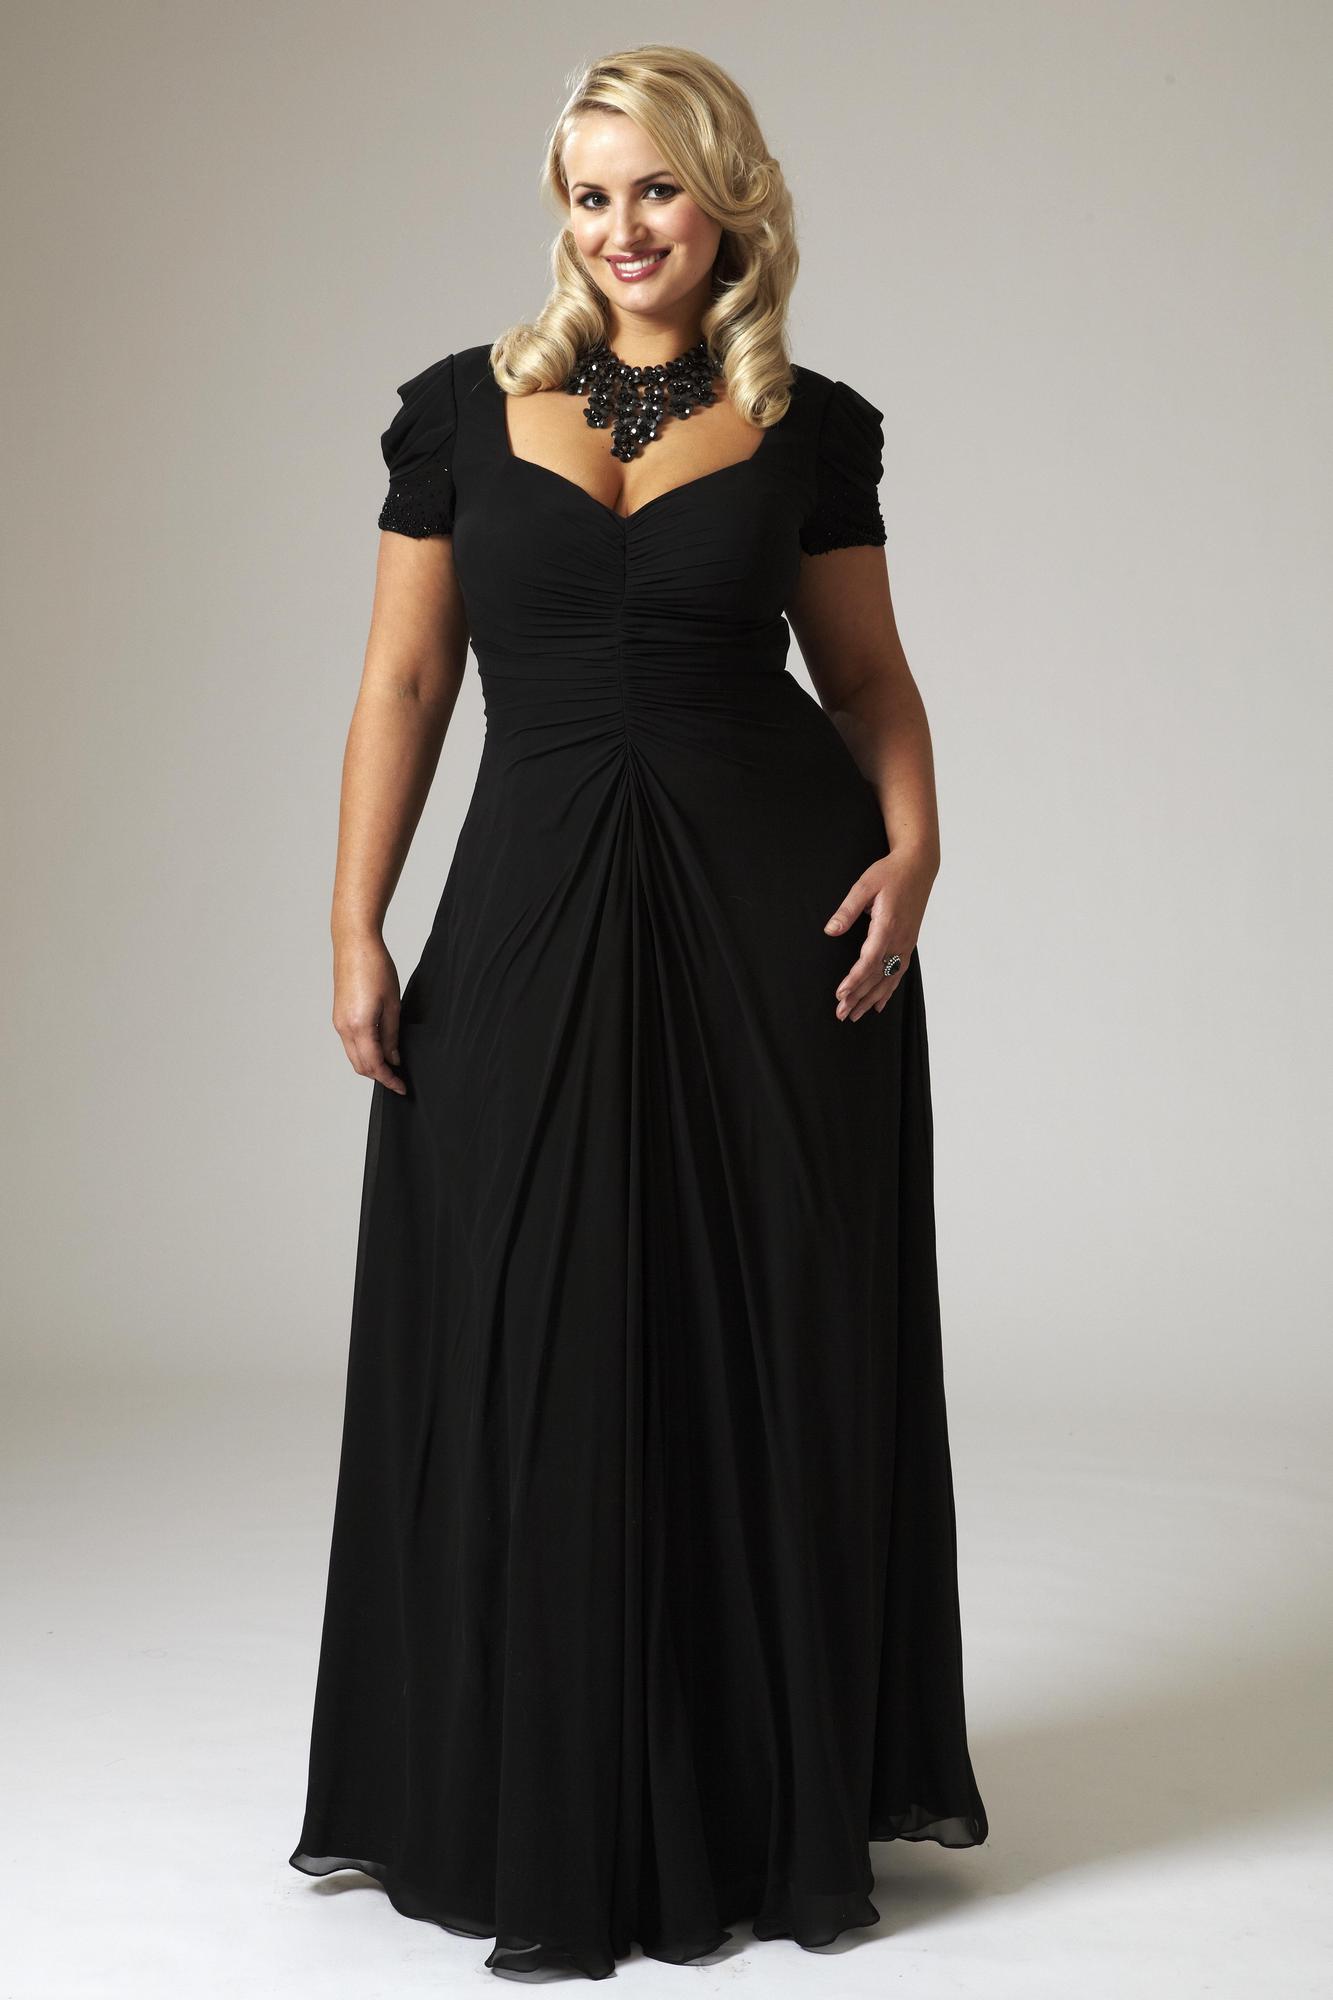 Best Plus Size Long Dresses For Weddings in the world Learn more here 